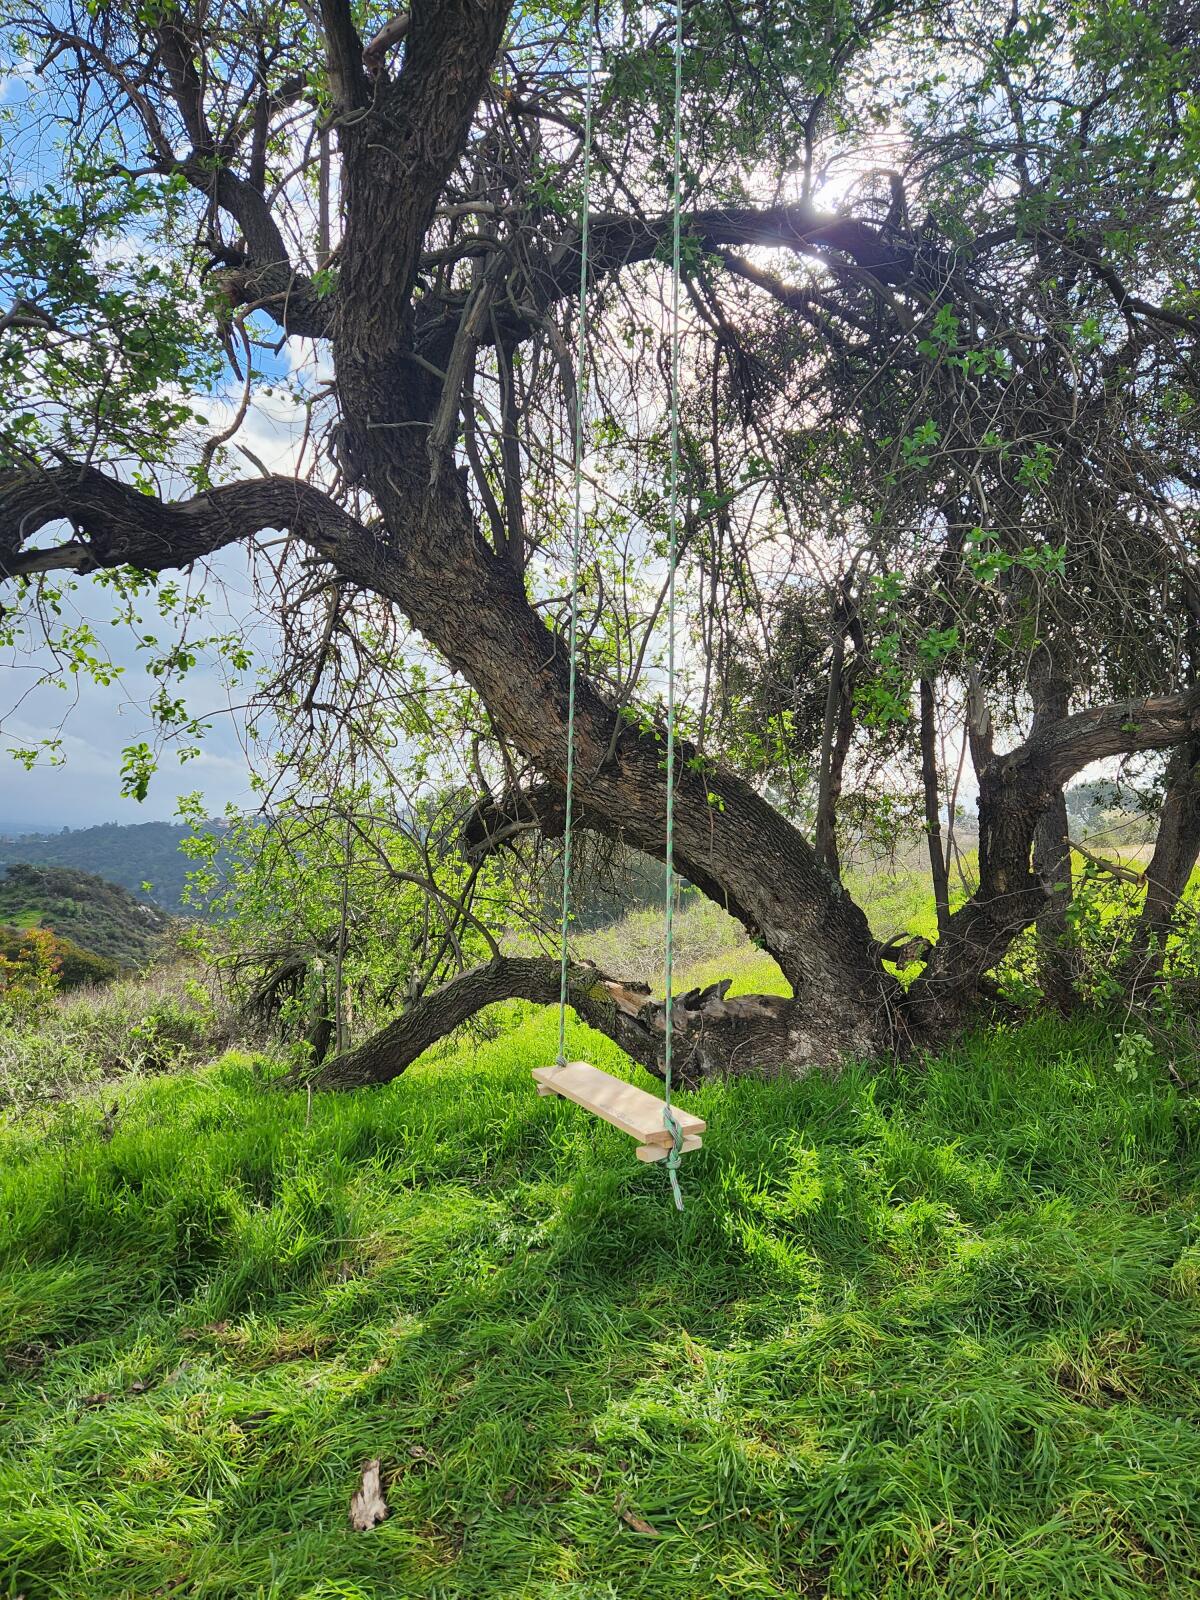 A photograph of a tree with a swing amid a green landscape